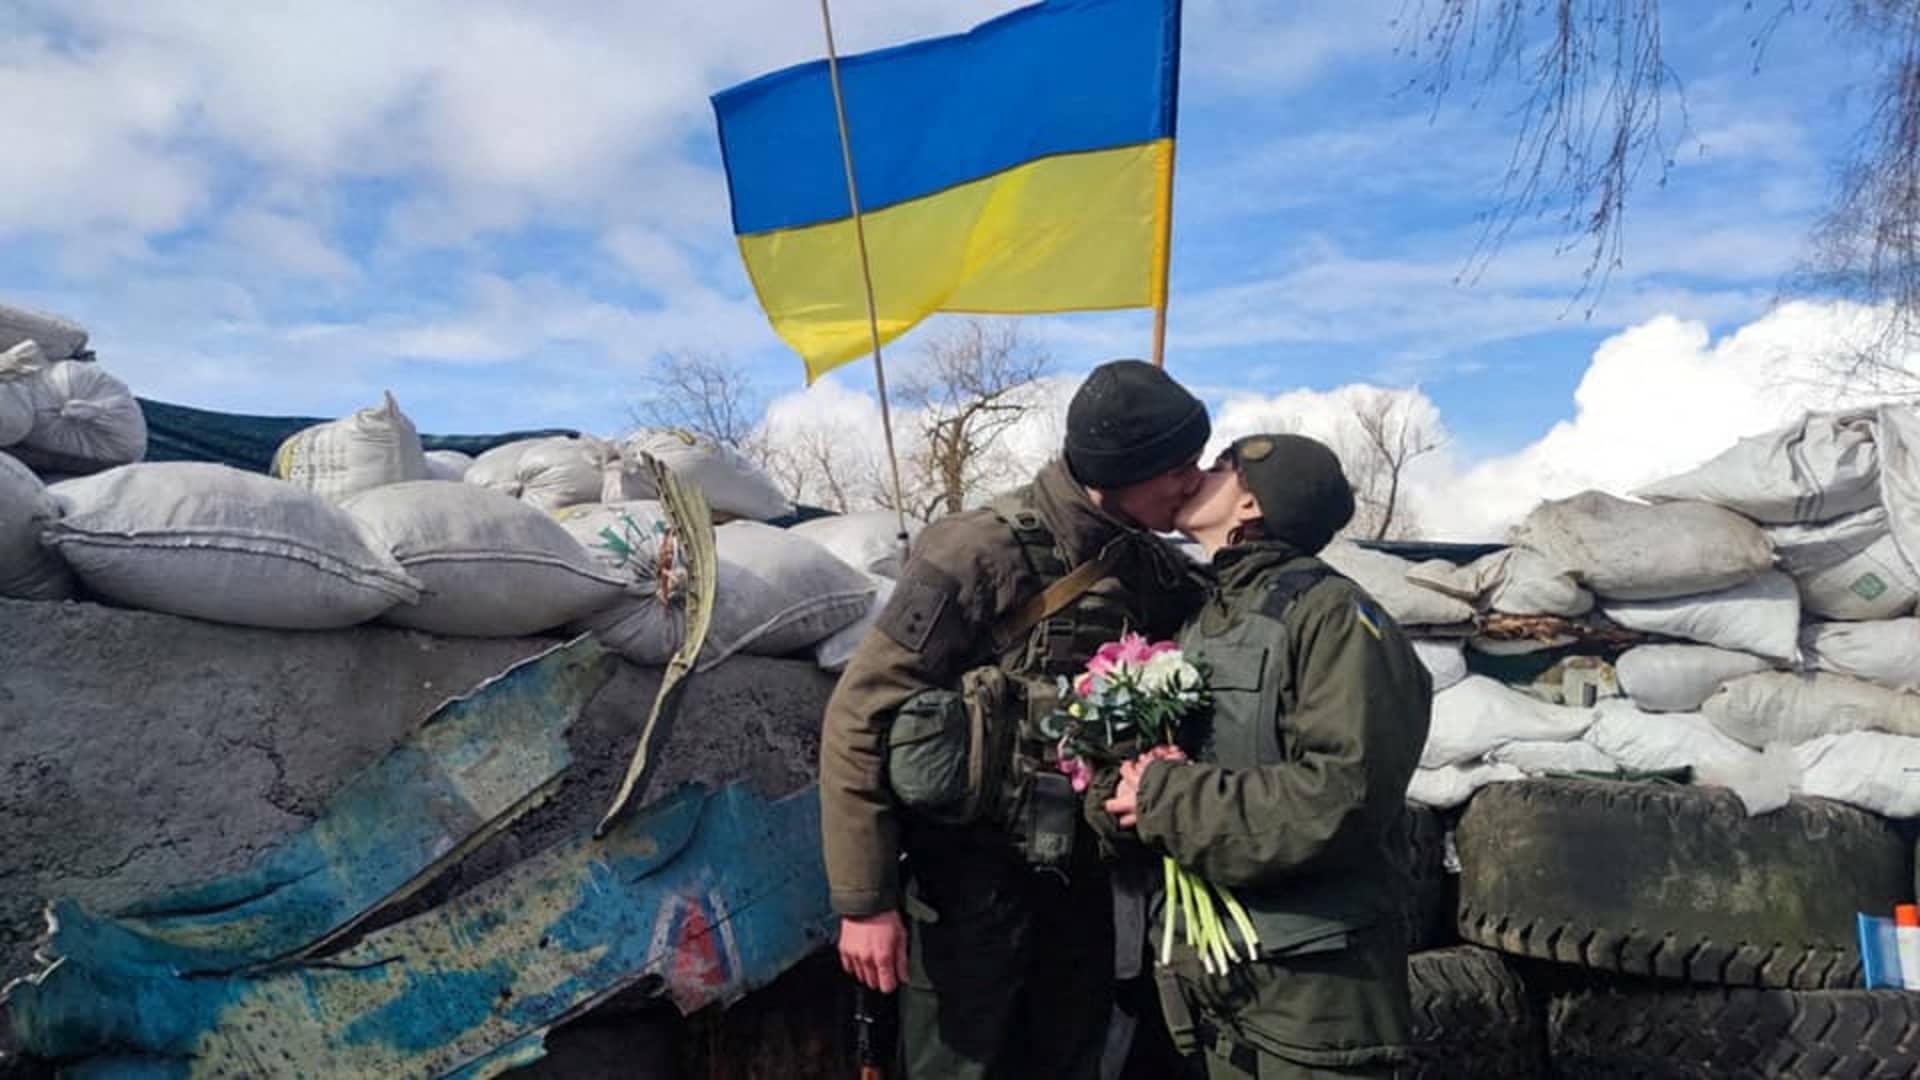 In Ukraine, war is turning love into marriages - CNBC